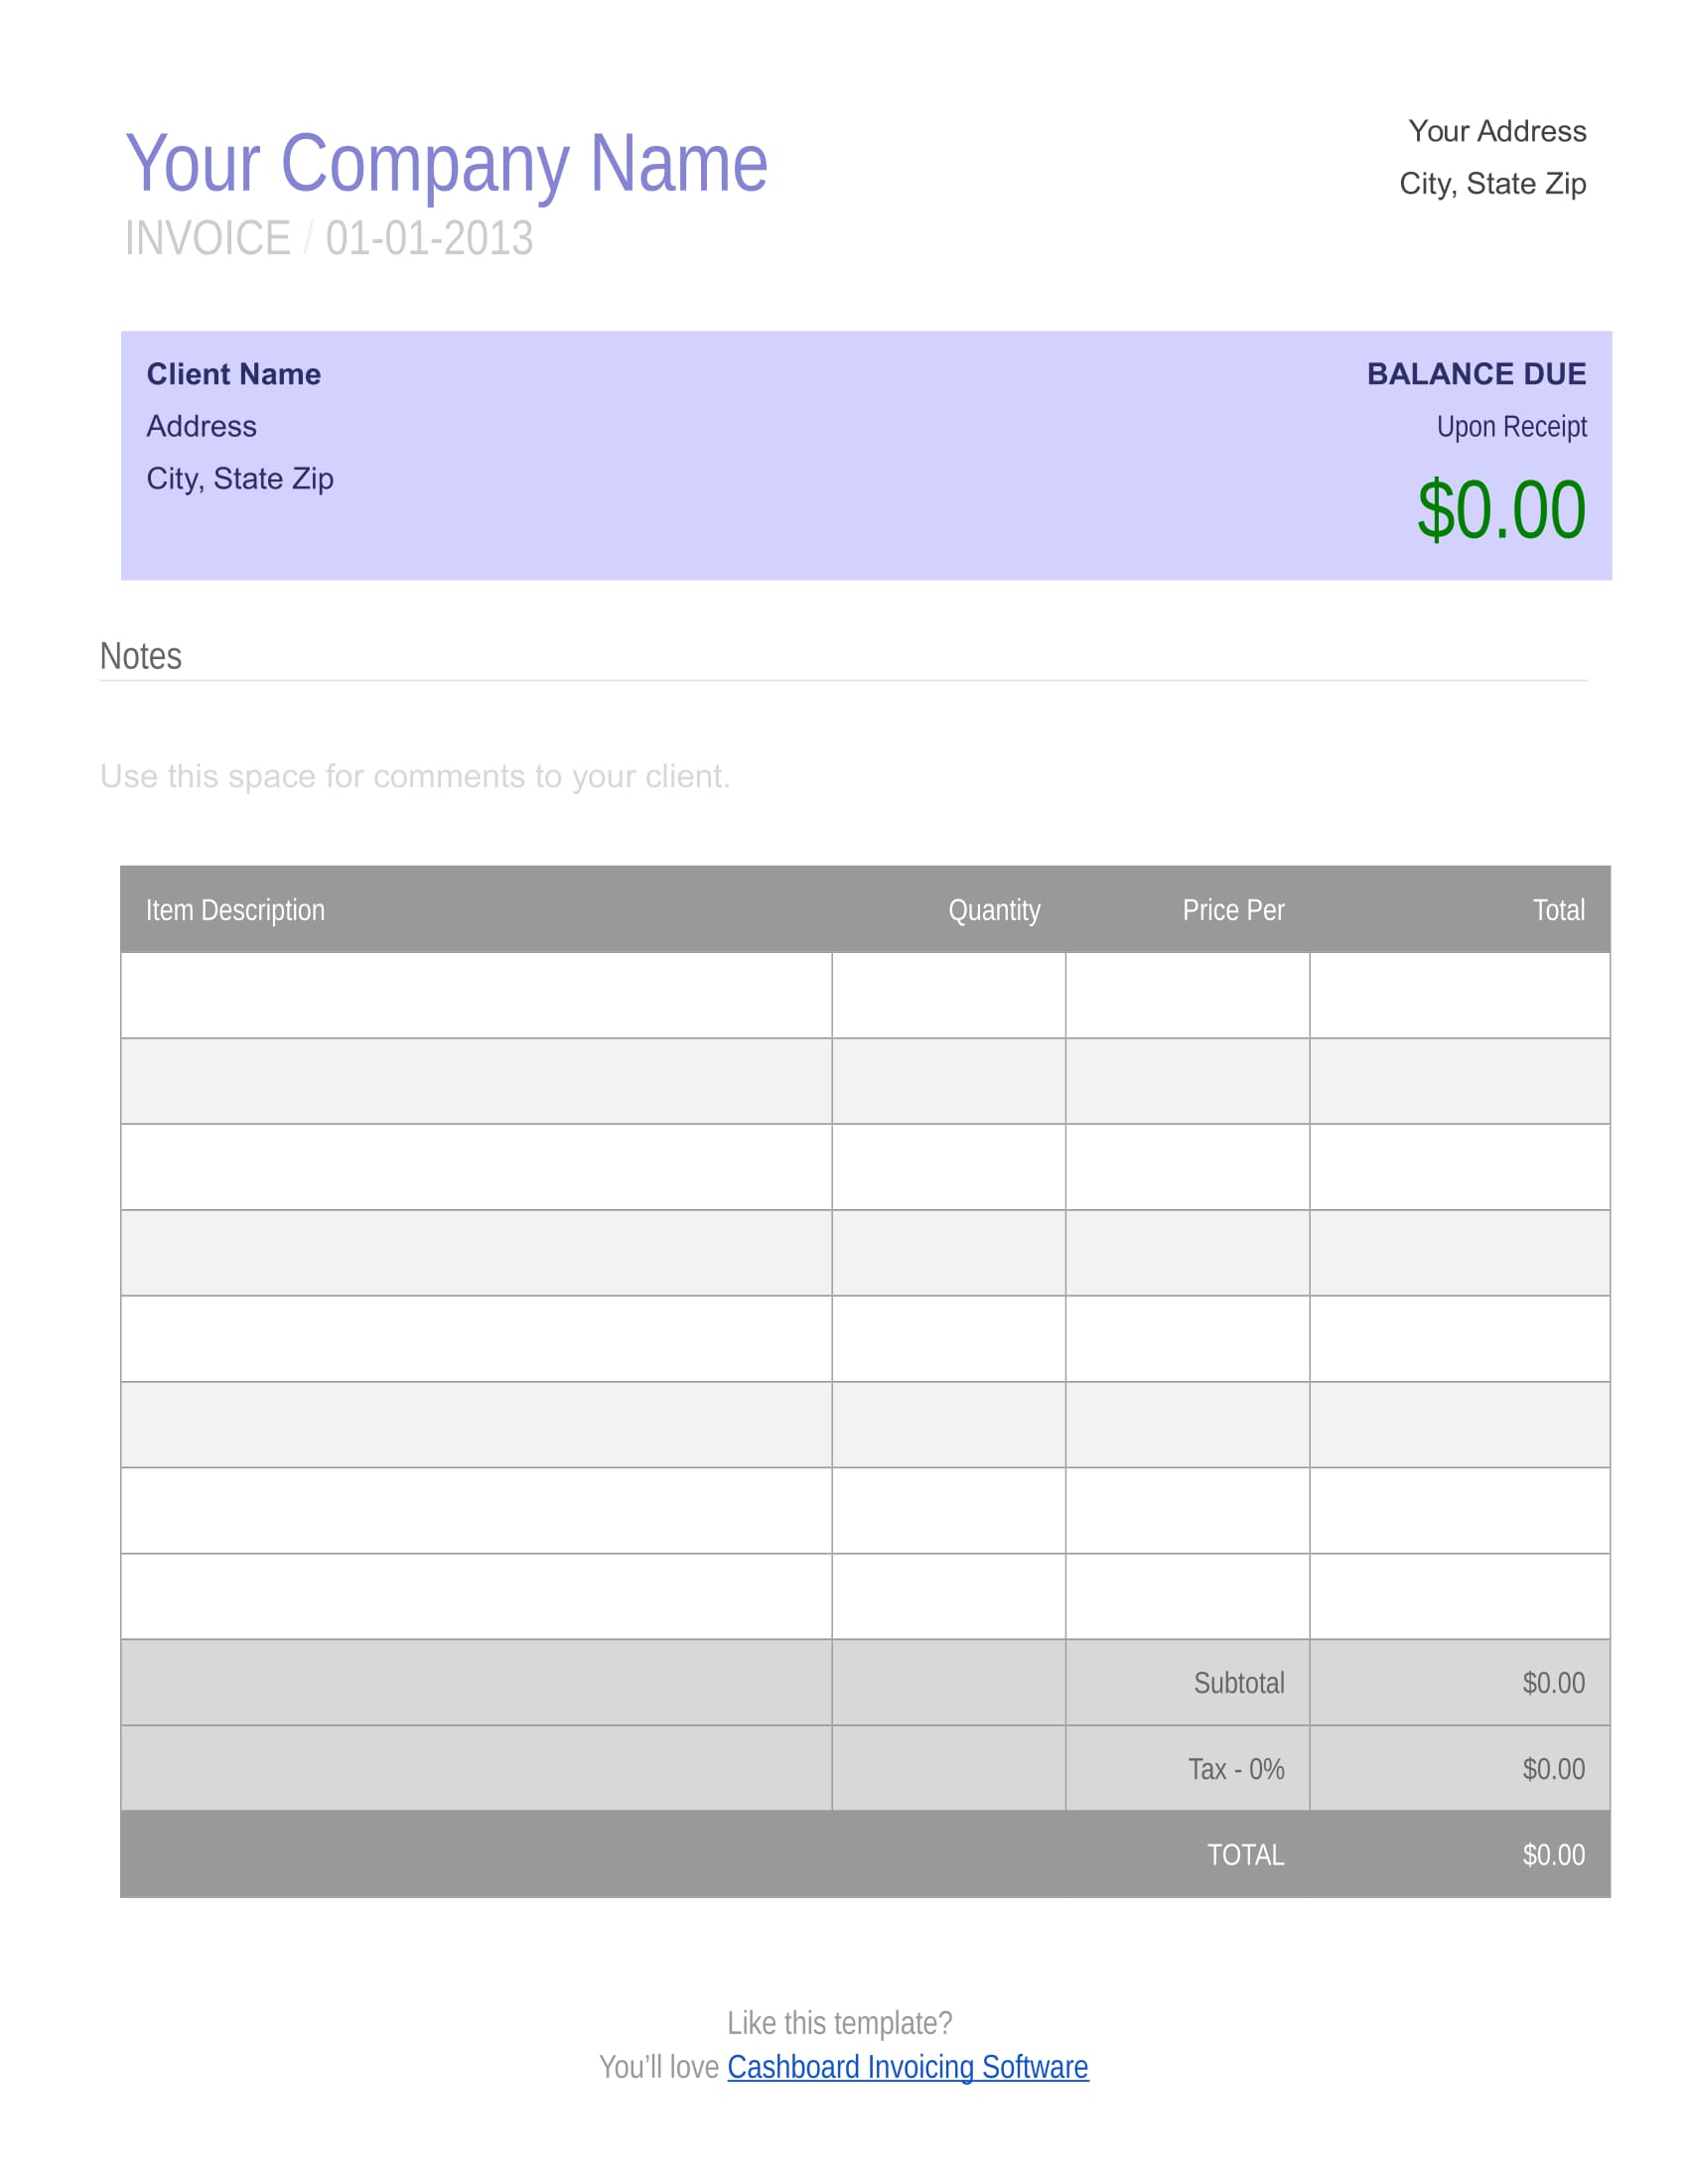 17+ Blank Invoice Templates - AI, PSD, Word | Examples